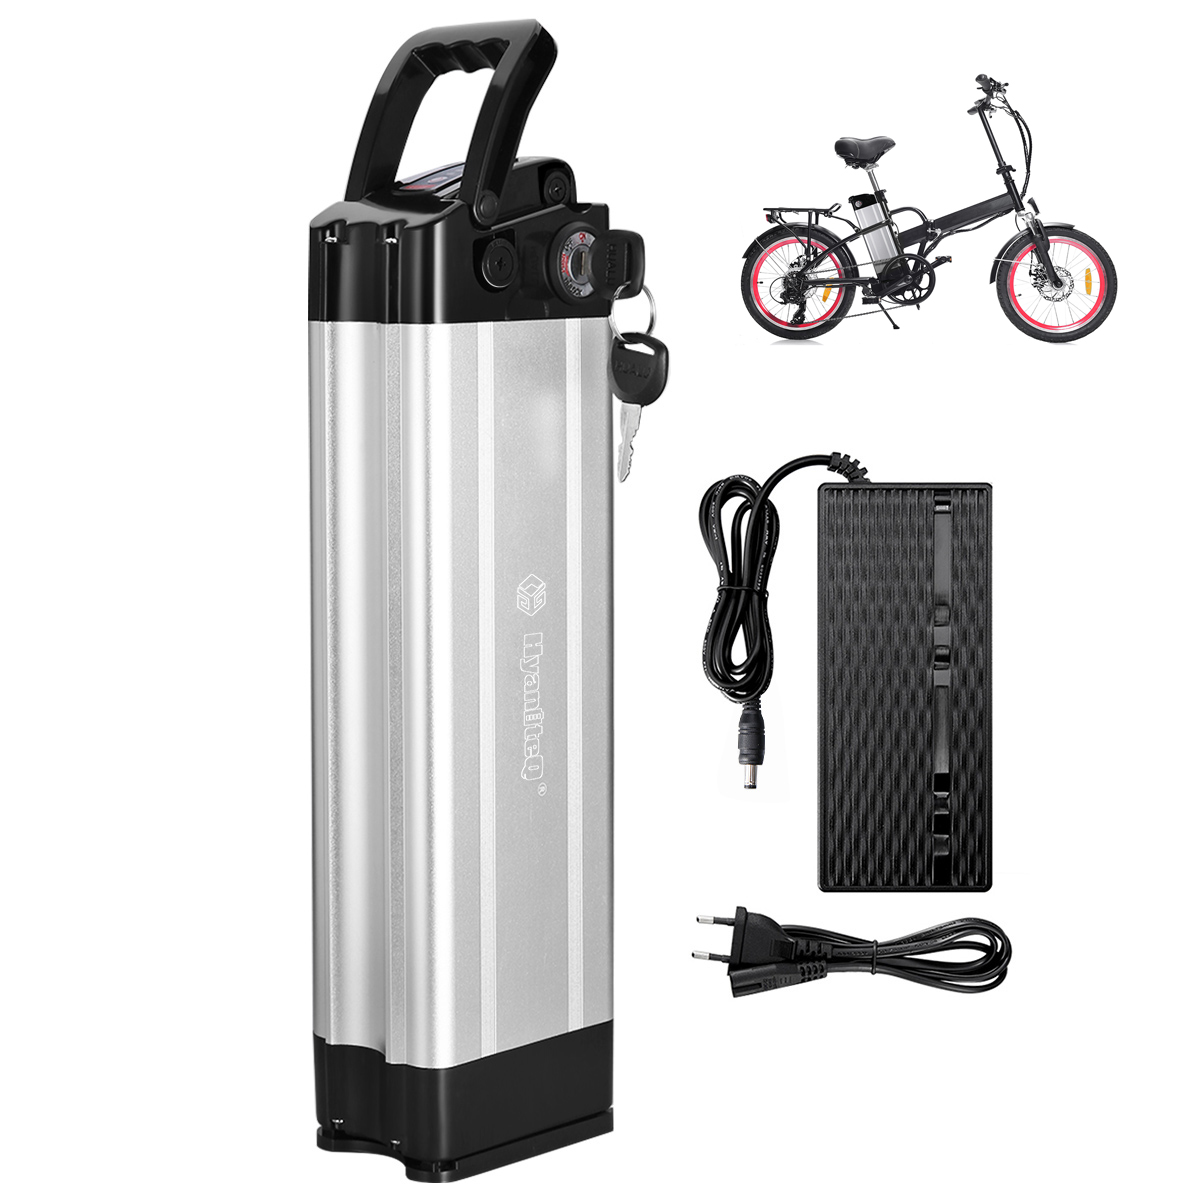 Find EU Direct HANIWINNER HA030 01 48V 12 5Ah 600W Electric Bike Battery Cells Pack E bikes Mountain Rechargeable Lithium Li ion Battery Charger for Mountain Bike City Bike eScooter for Sale on Gipsybee.com with cryptocurrencies